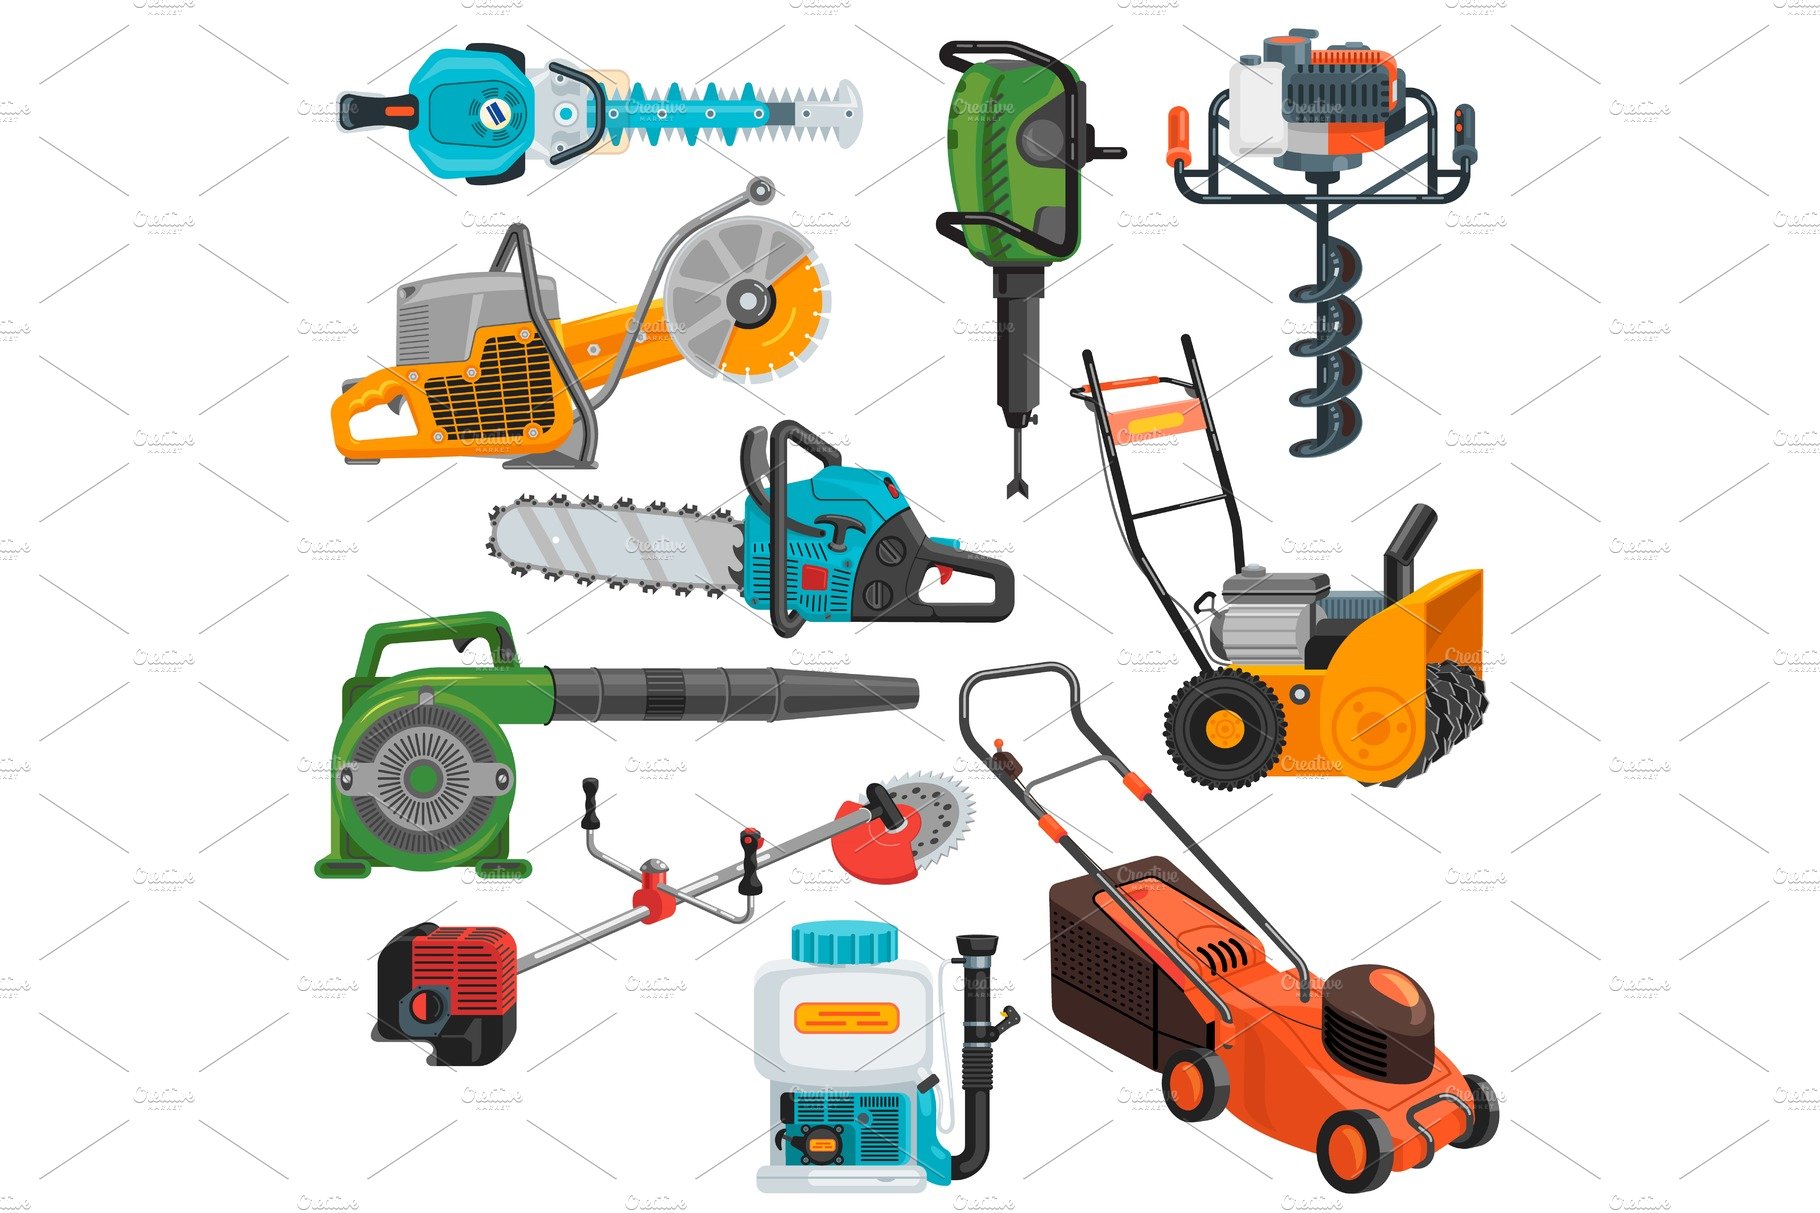 Power tools vector electric cover image.